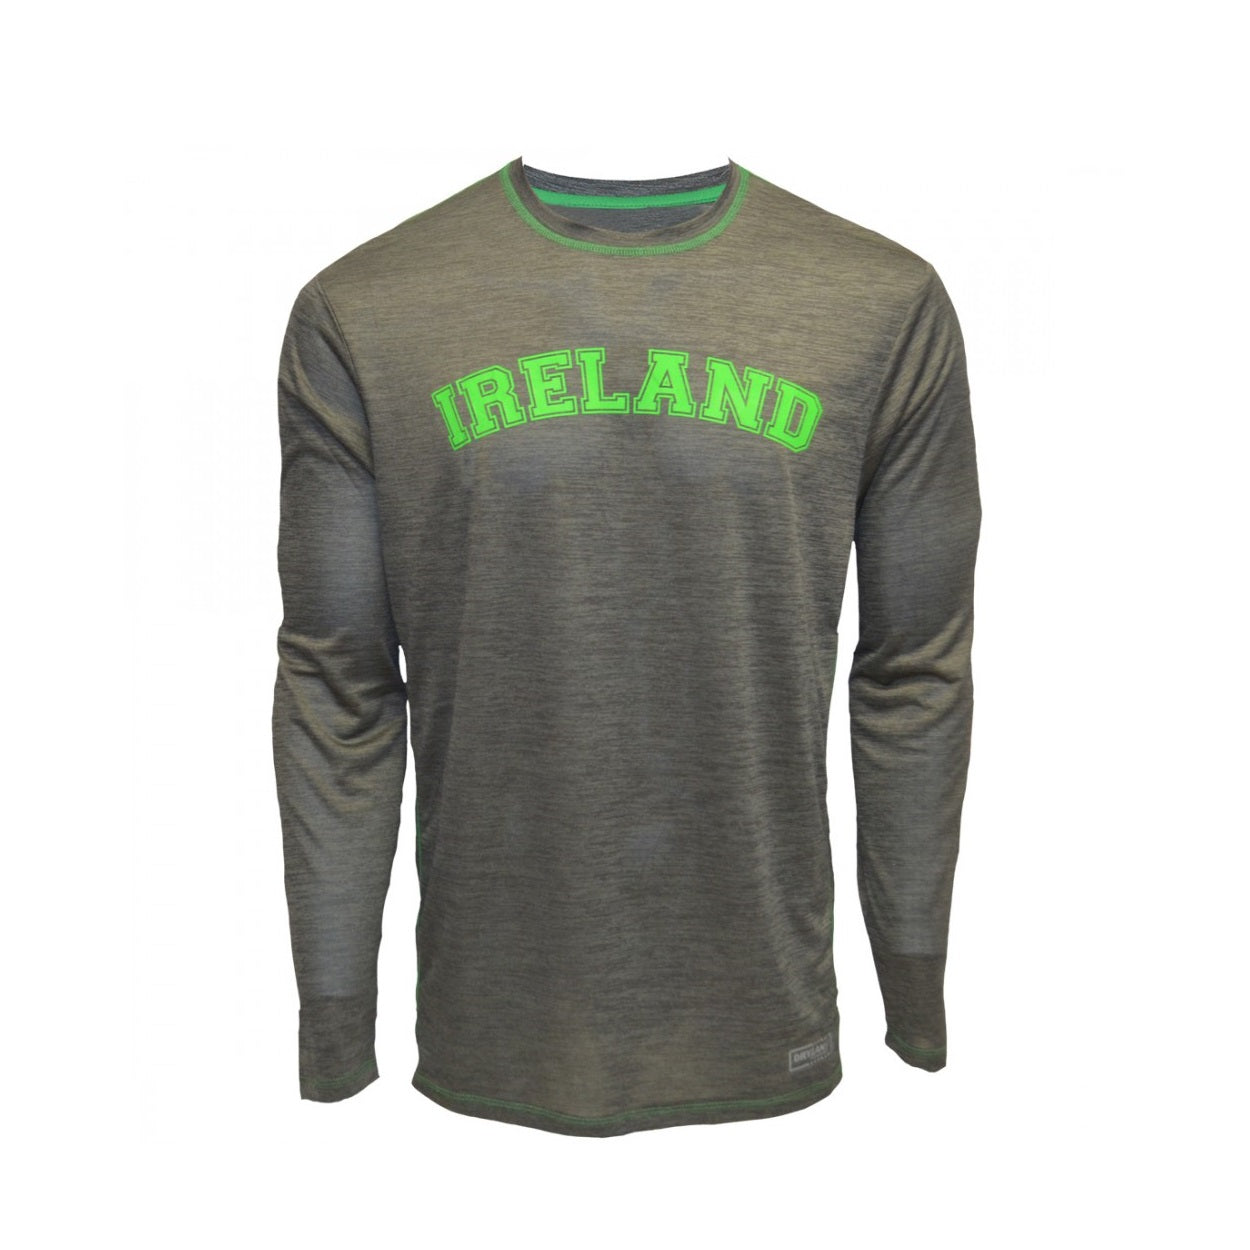 Lansdowne Grey Ireland Long Sleeve Performance Top  Grey performance long sleeve shirt features vivid green stitching with matching text "Ireland" across the chest.  Part of the Lansdowne Collection.  Fabric: Drylan's Performance Dry Fit Performance  Stabilizes core temperature, draws moisture away from the skin, enhances breathability and comfort, improves hydration and circulation, and aids peak performance.